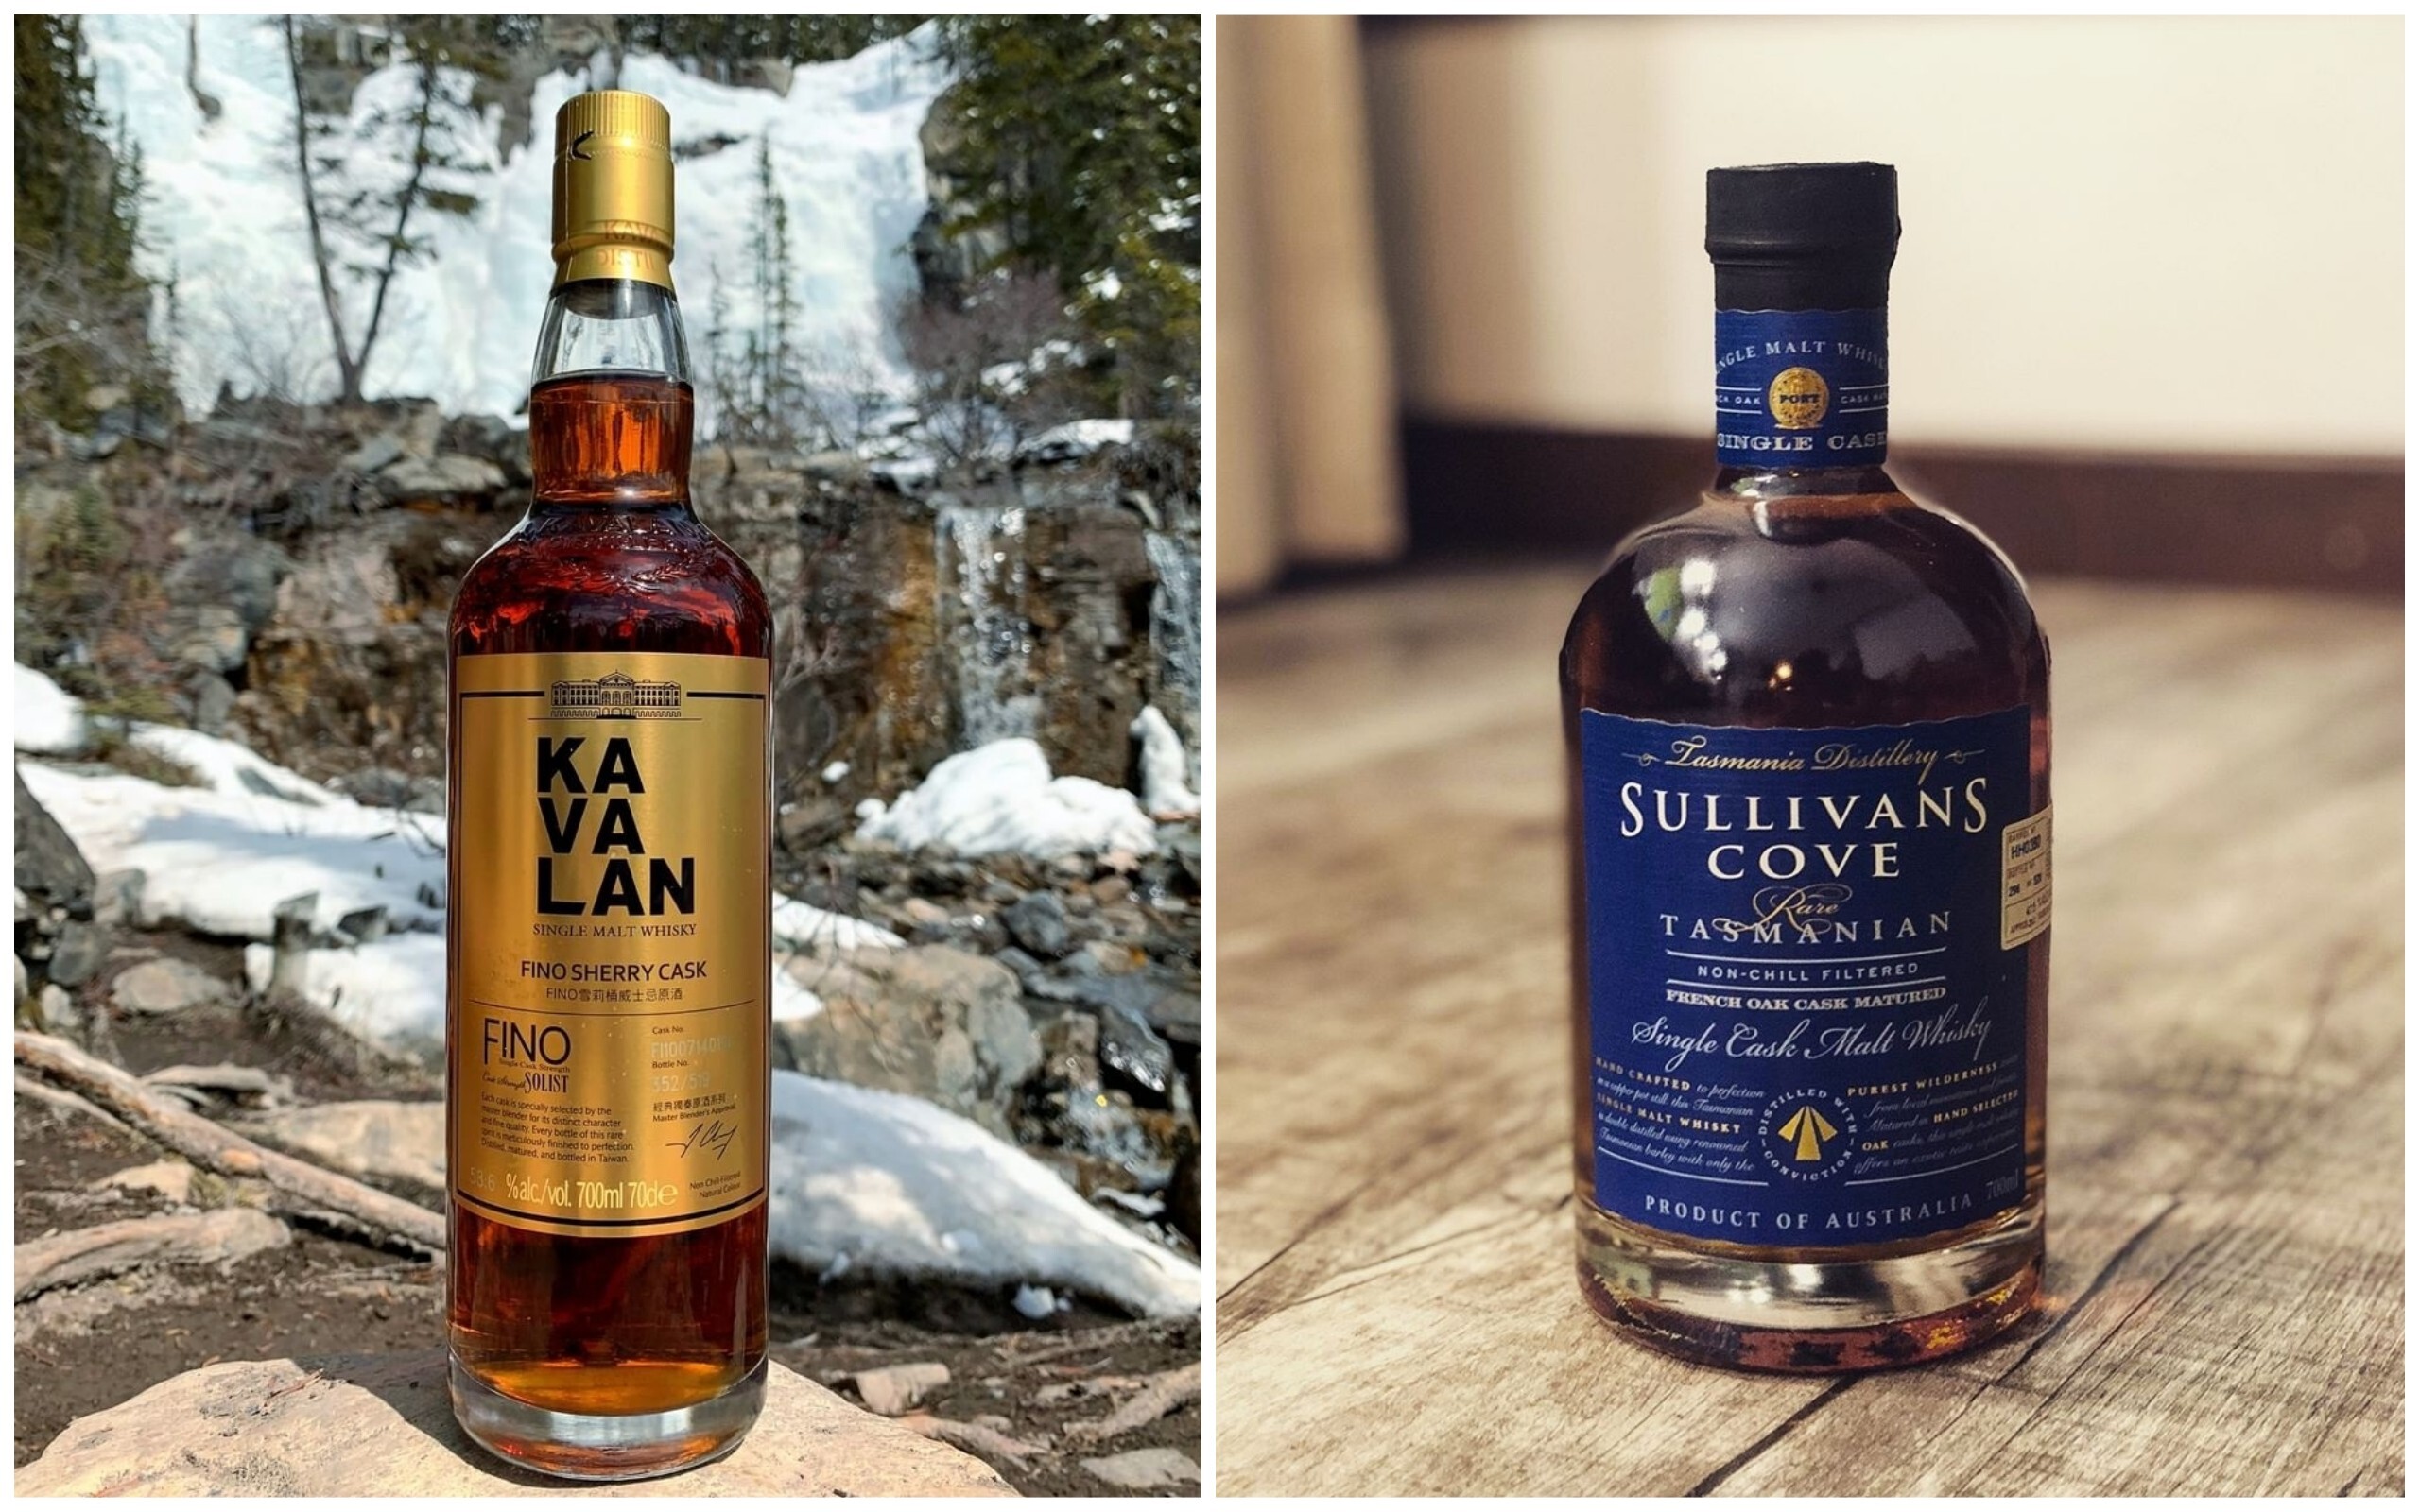 Spanning from Taiwan to Tasmania, which single cask whisky is better – Kavalan or Sullivans Cove? Photo: Instagram